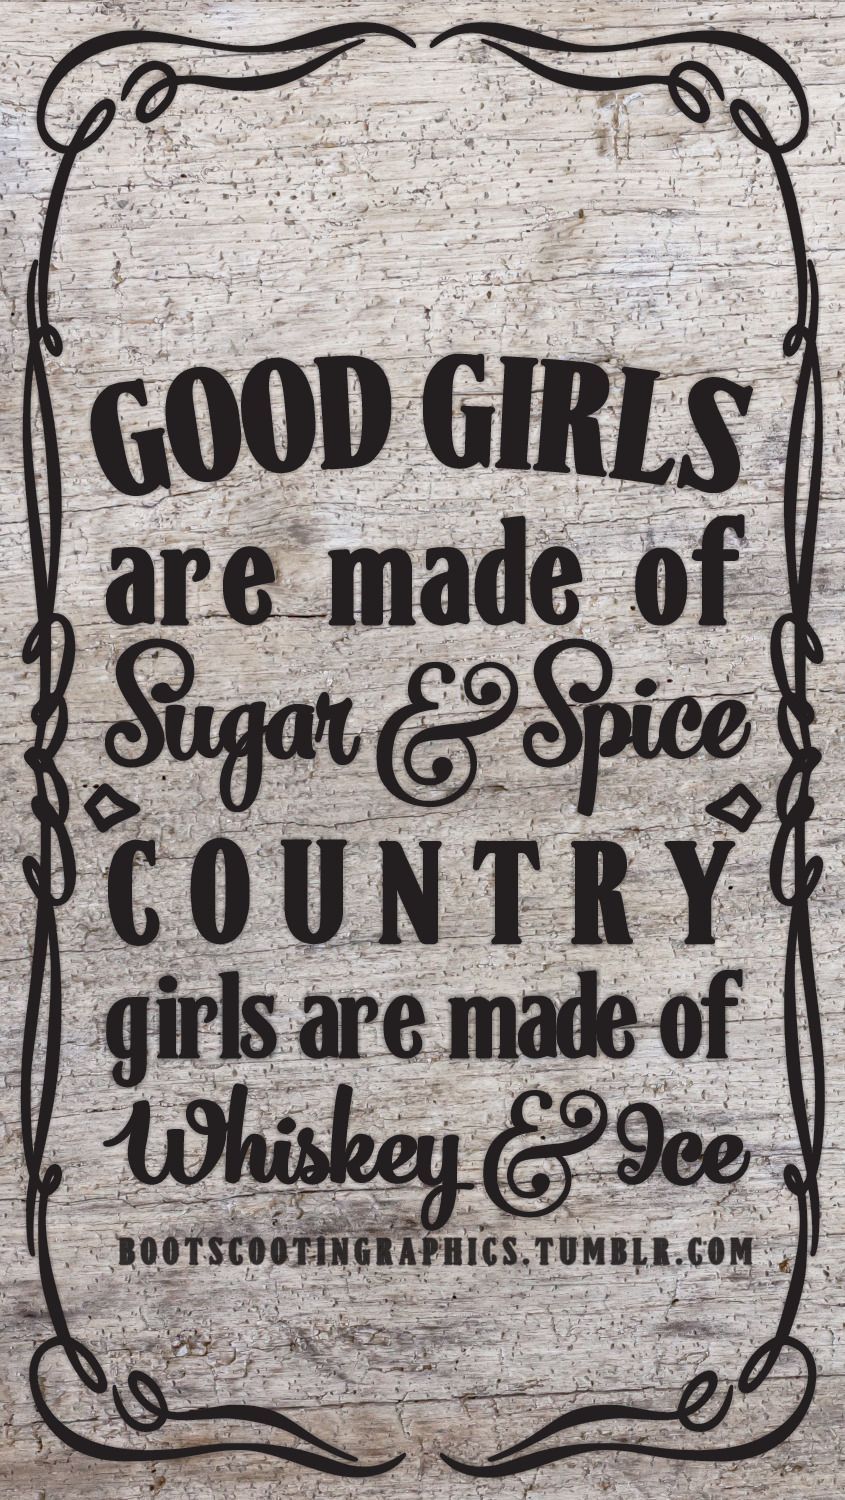 Boot Scootin' Graphics. Country girl quotes, Country quotes, Southern girl quotes